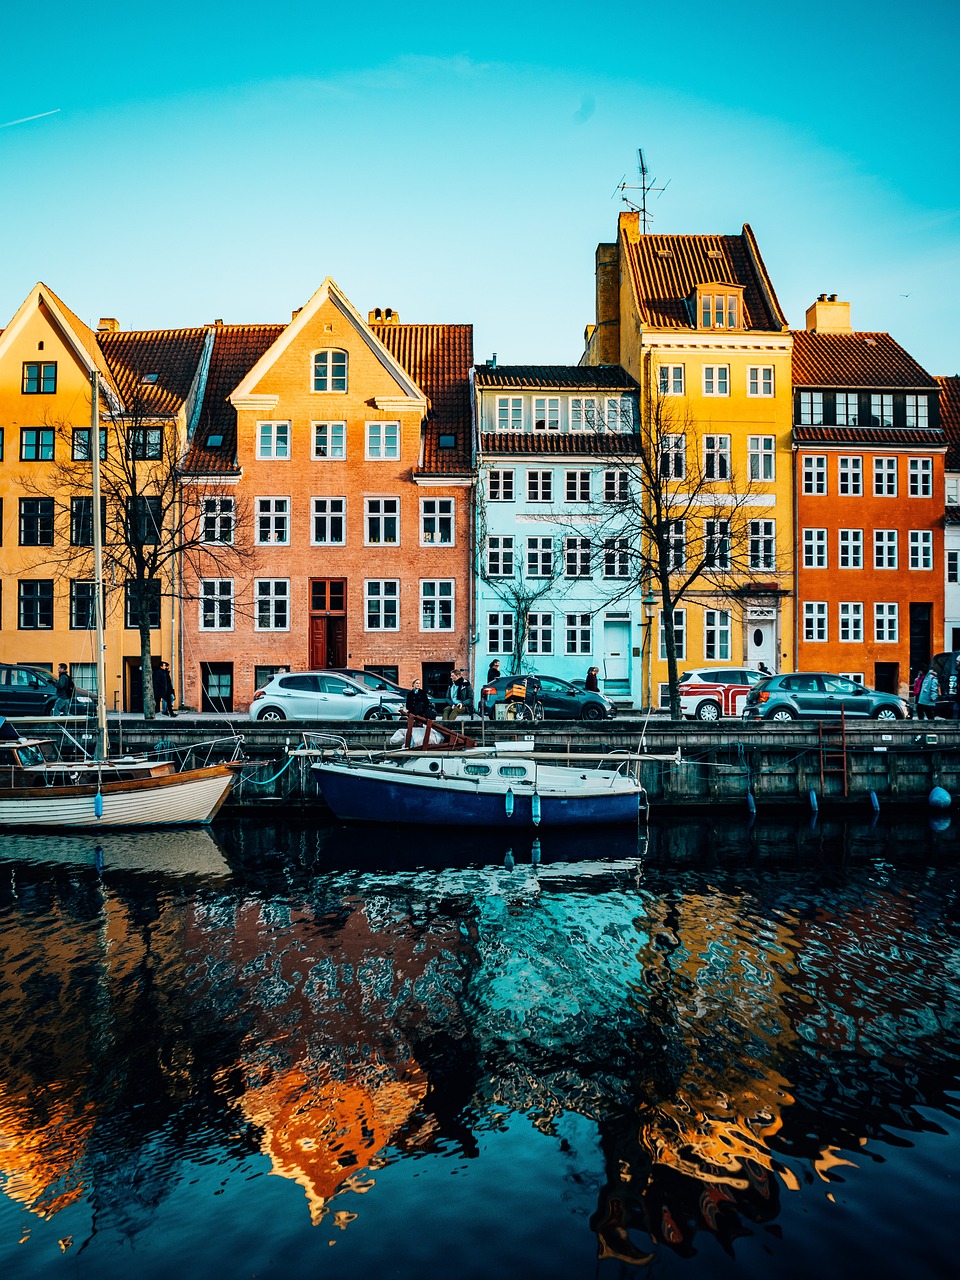 Family Fun in Copenhagen: Parks, Museums, and Dining